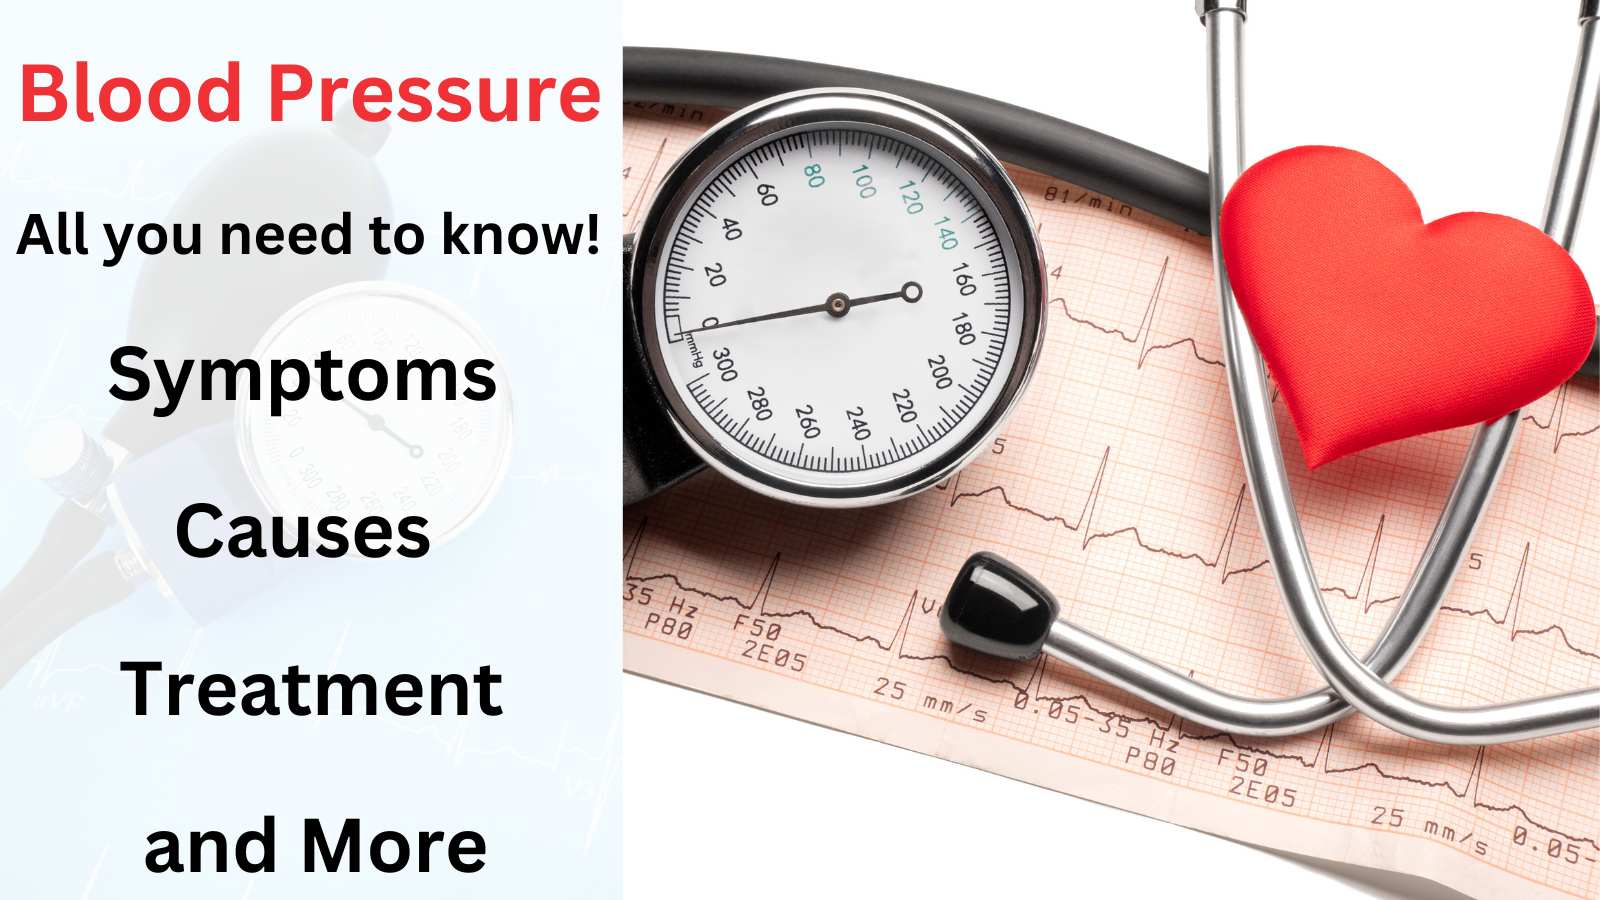 Blood Pressure - symptoms, causes, treatment and more